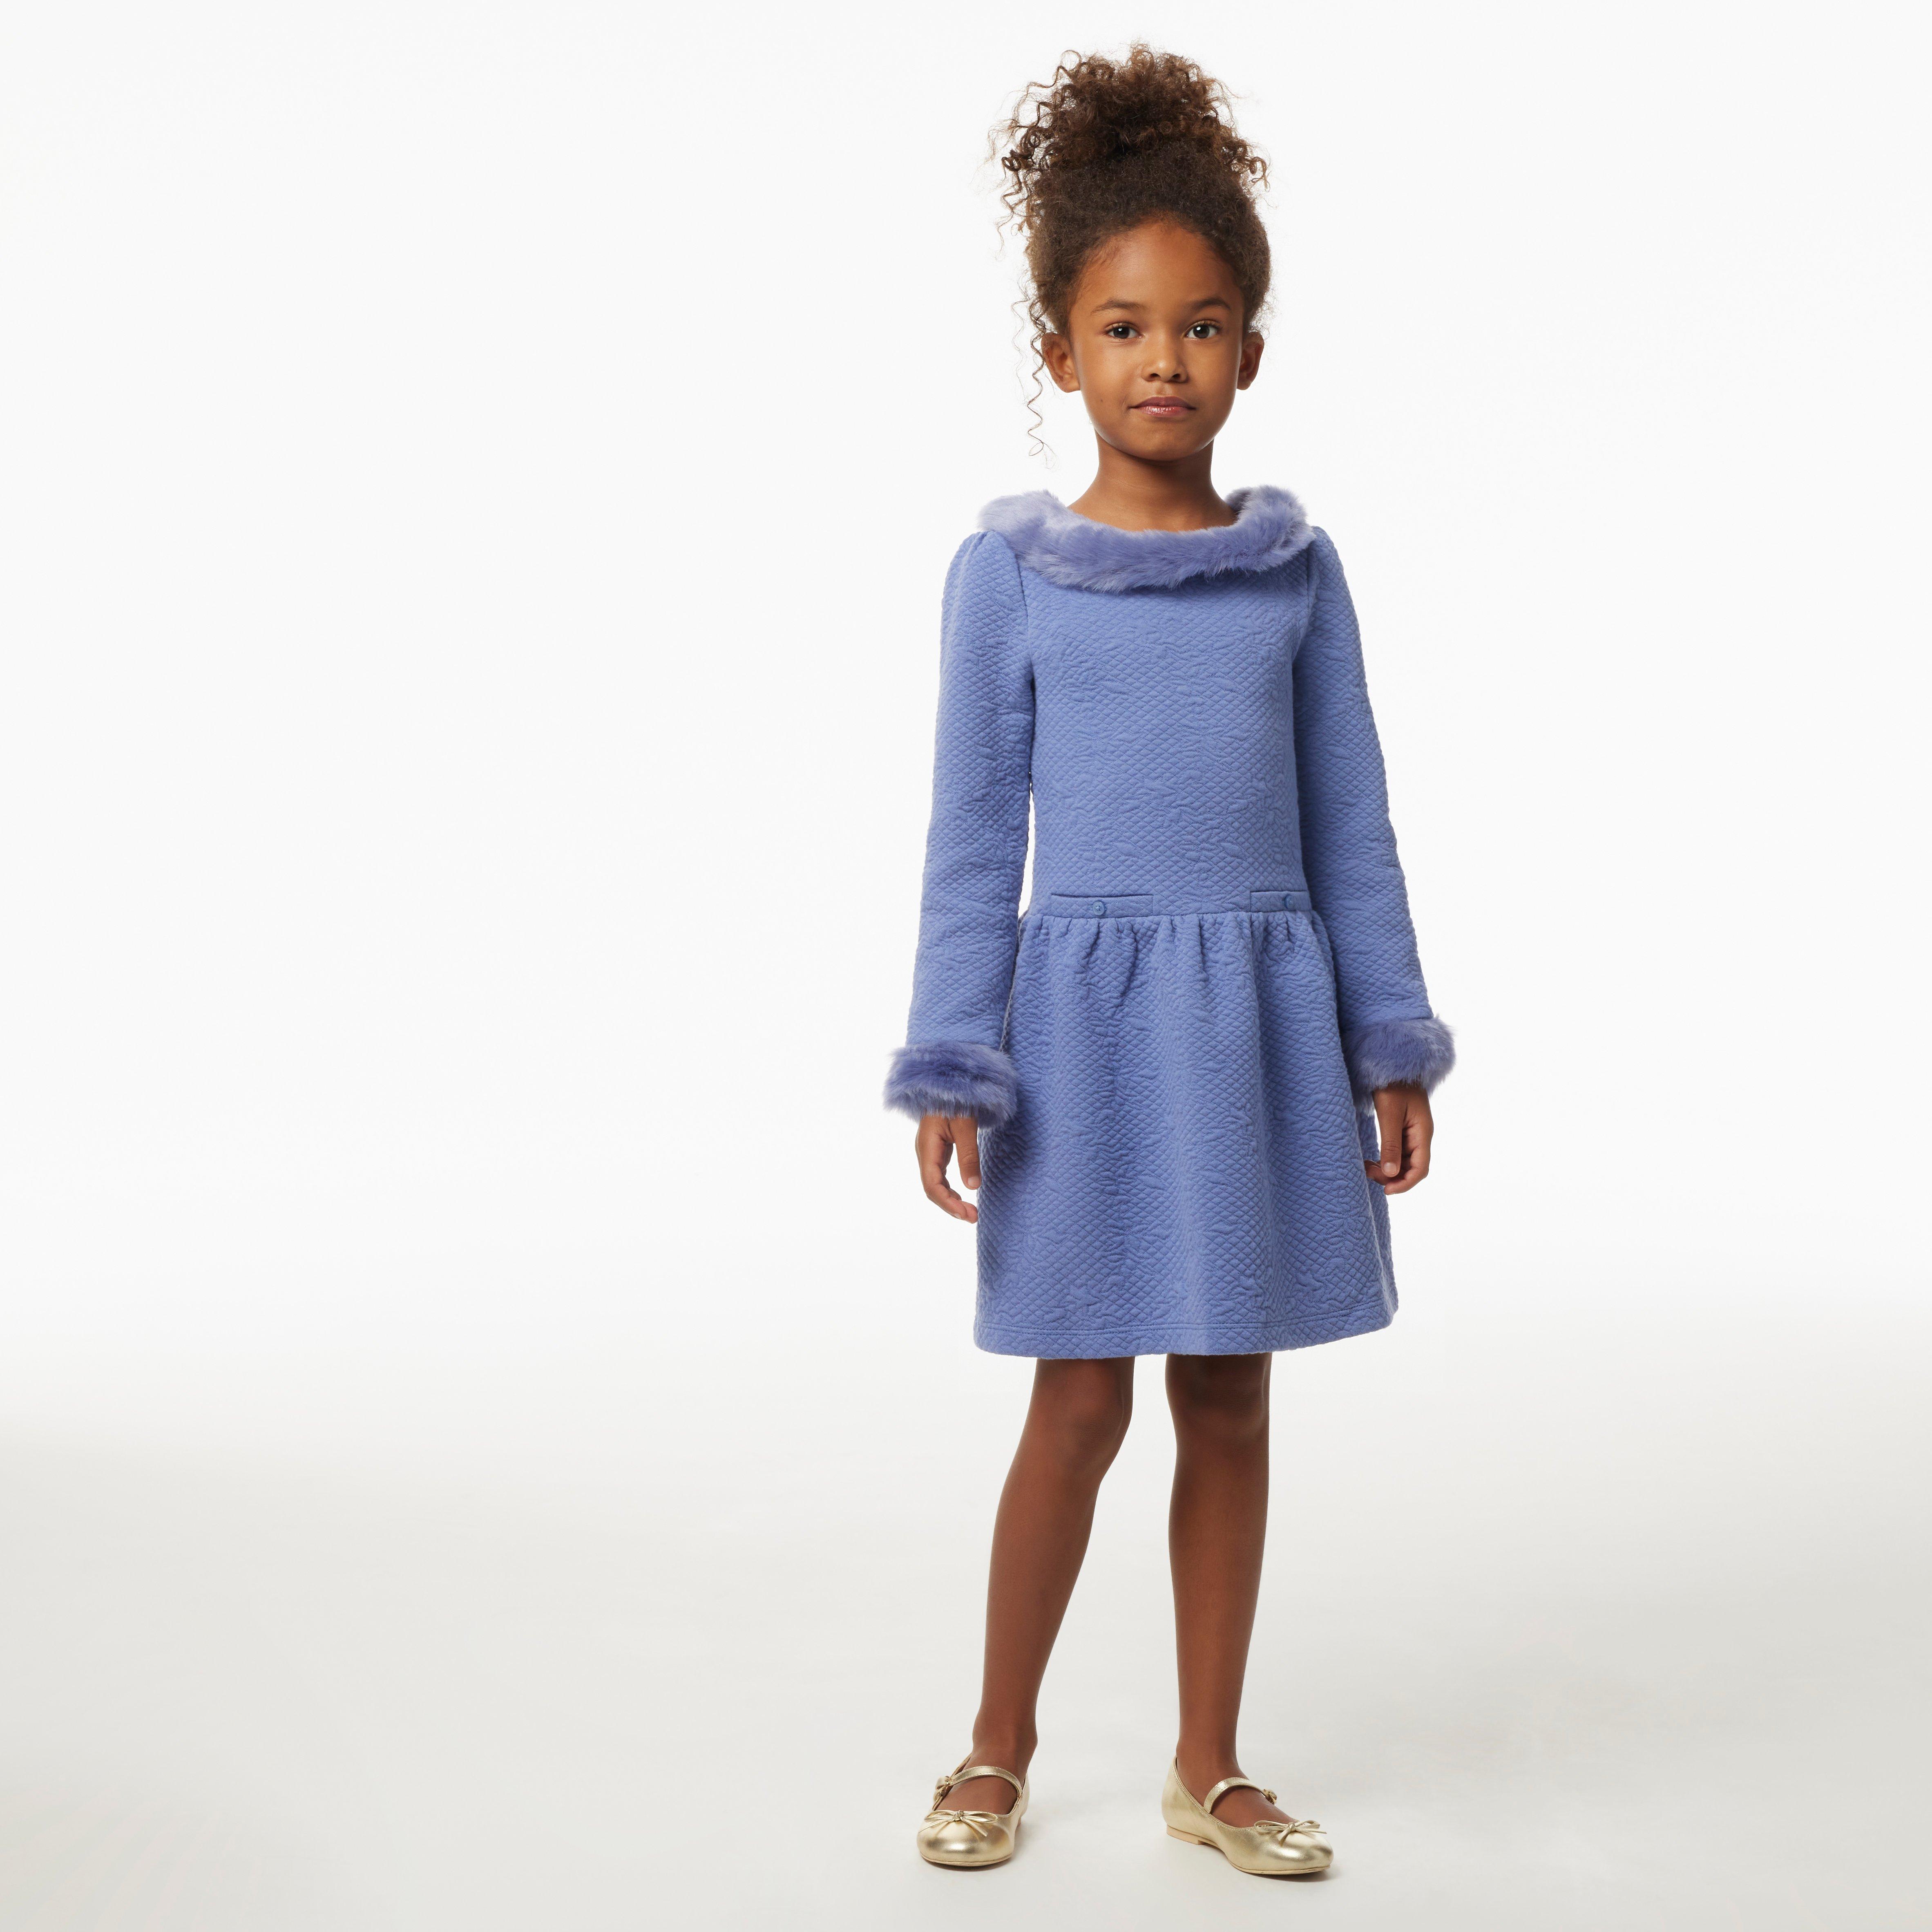 Girl Periwinkle Morning Quilted Faux Fur Trim Jacquard Dress by